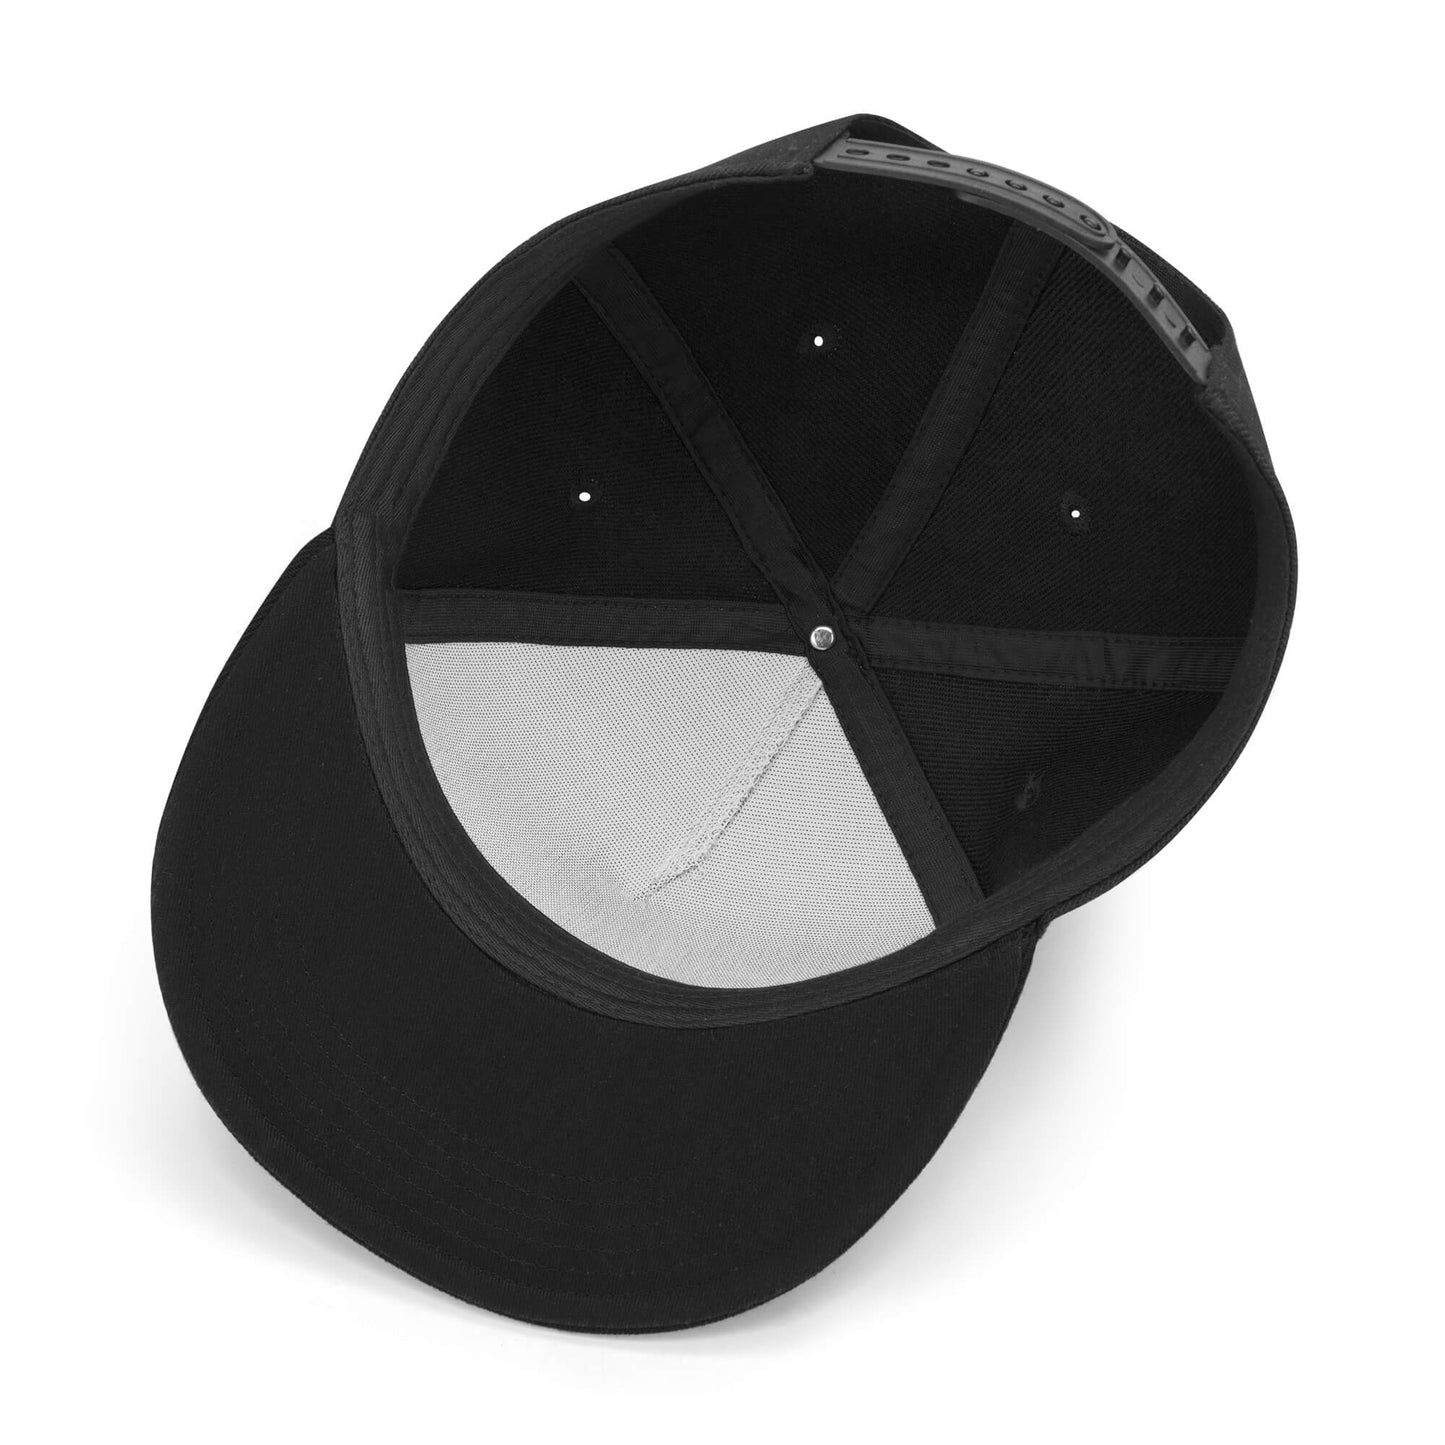 DOPiFiED Casual Hip-hop Hat